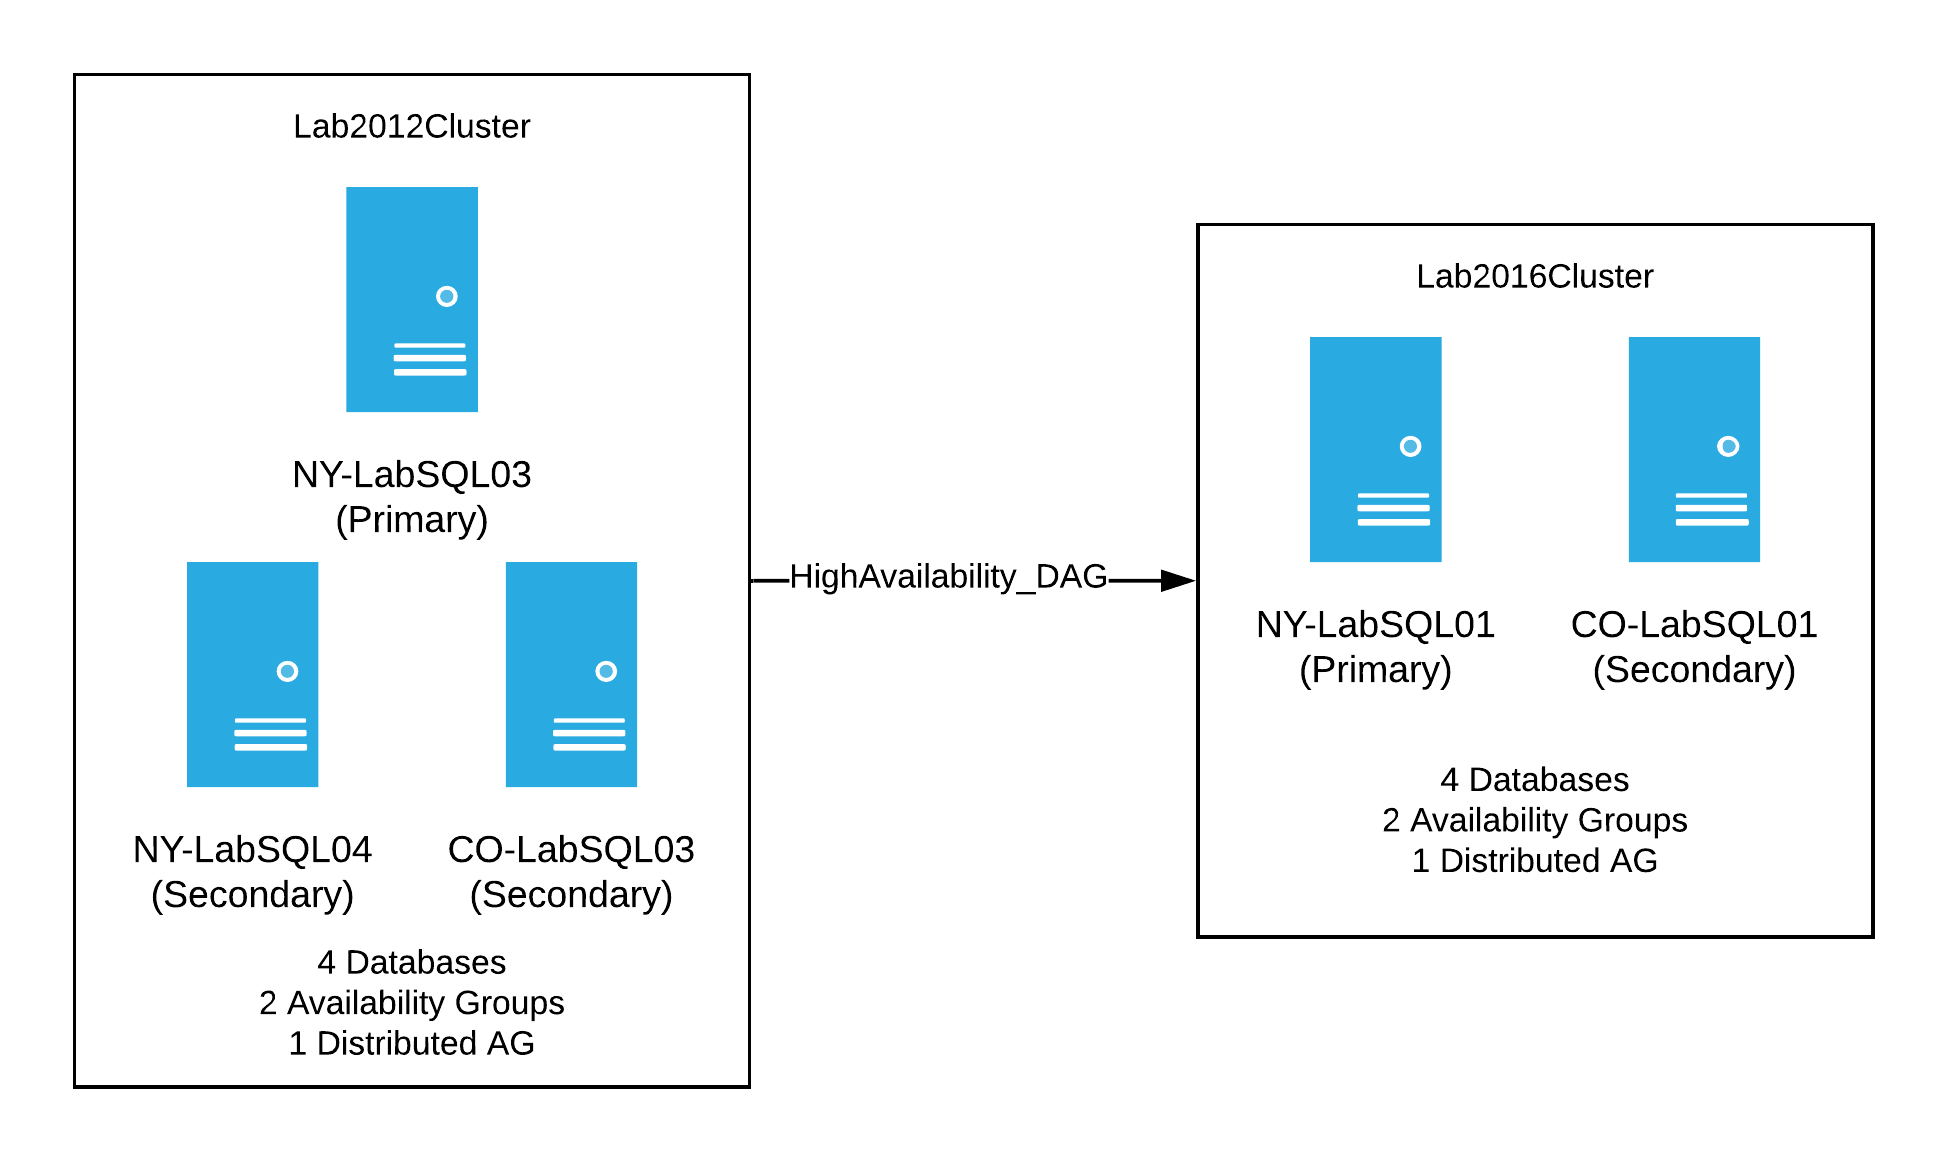 Lab Cluster - 2012 to 2016